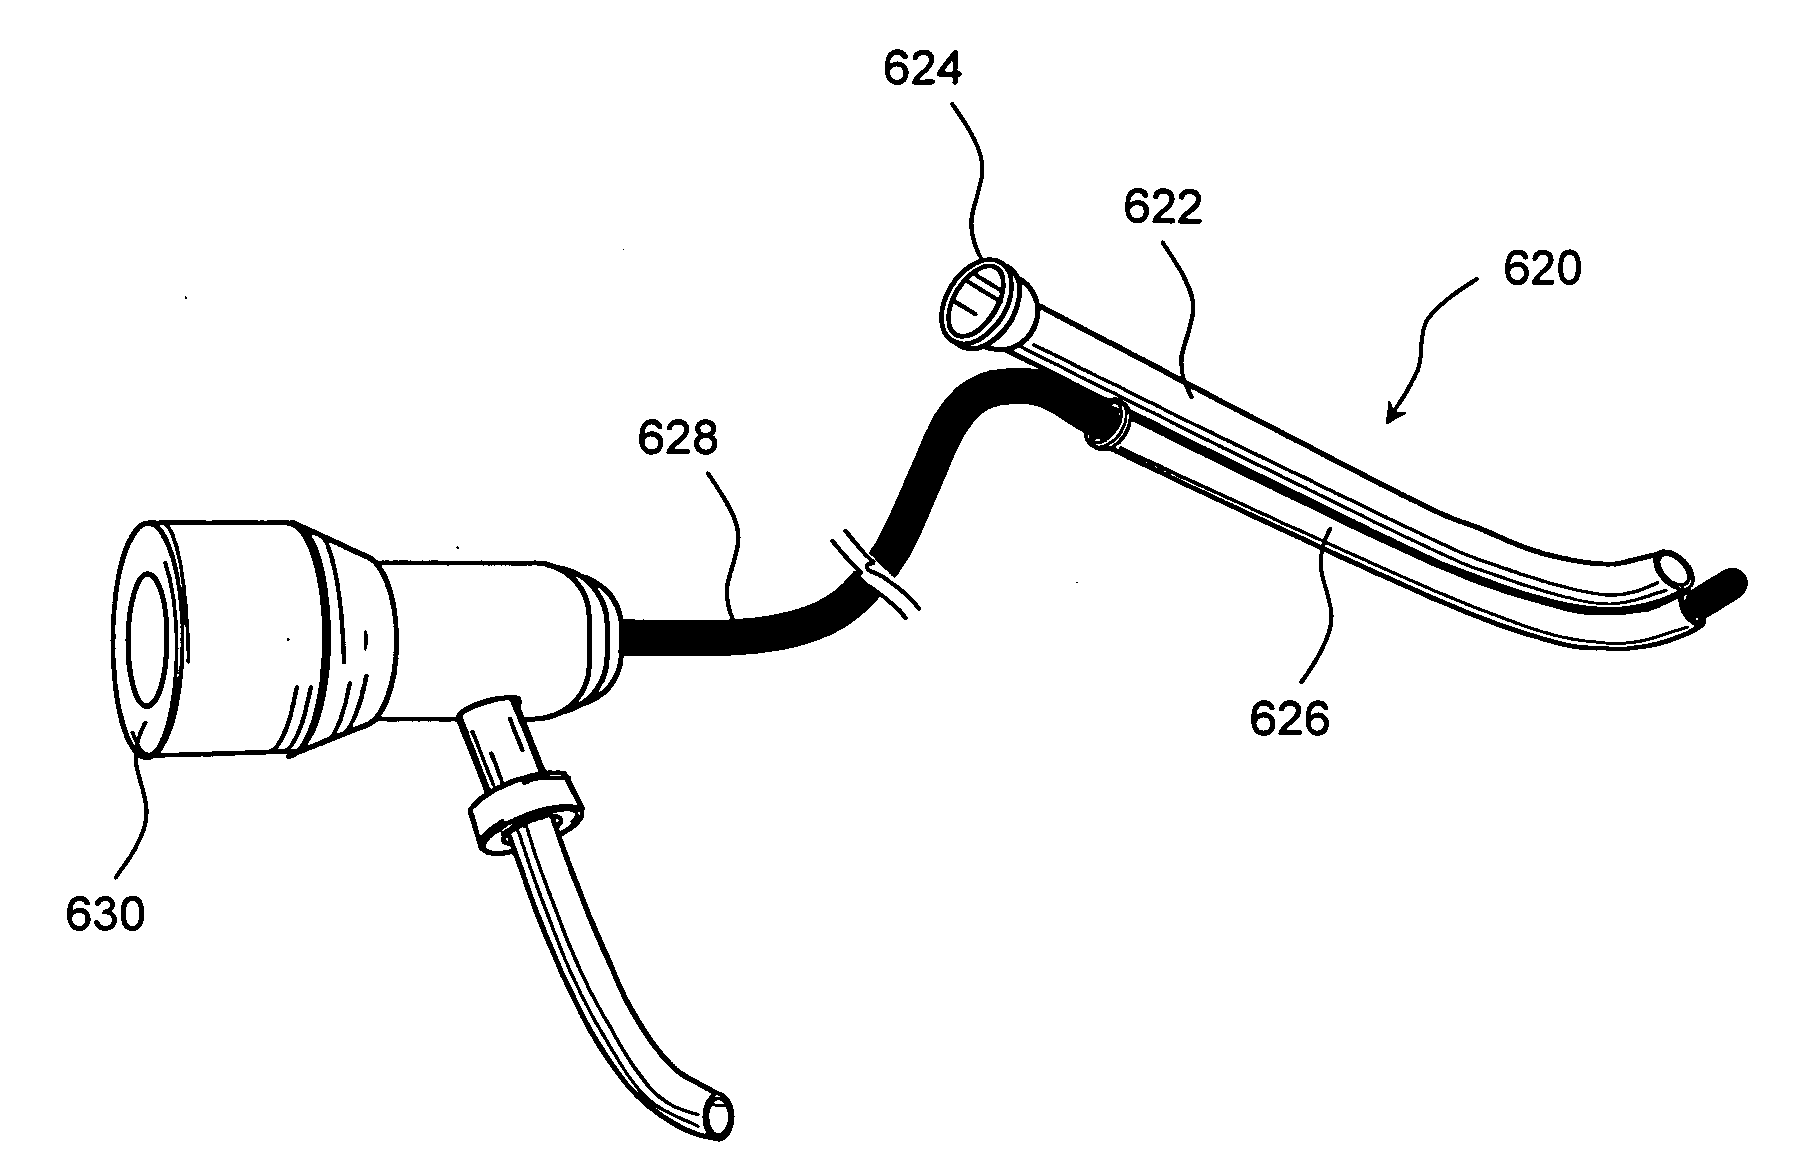 Methods and apparatus for treating disorders of the ear, nose and throat